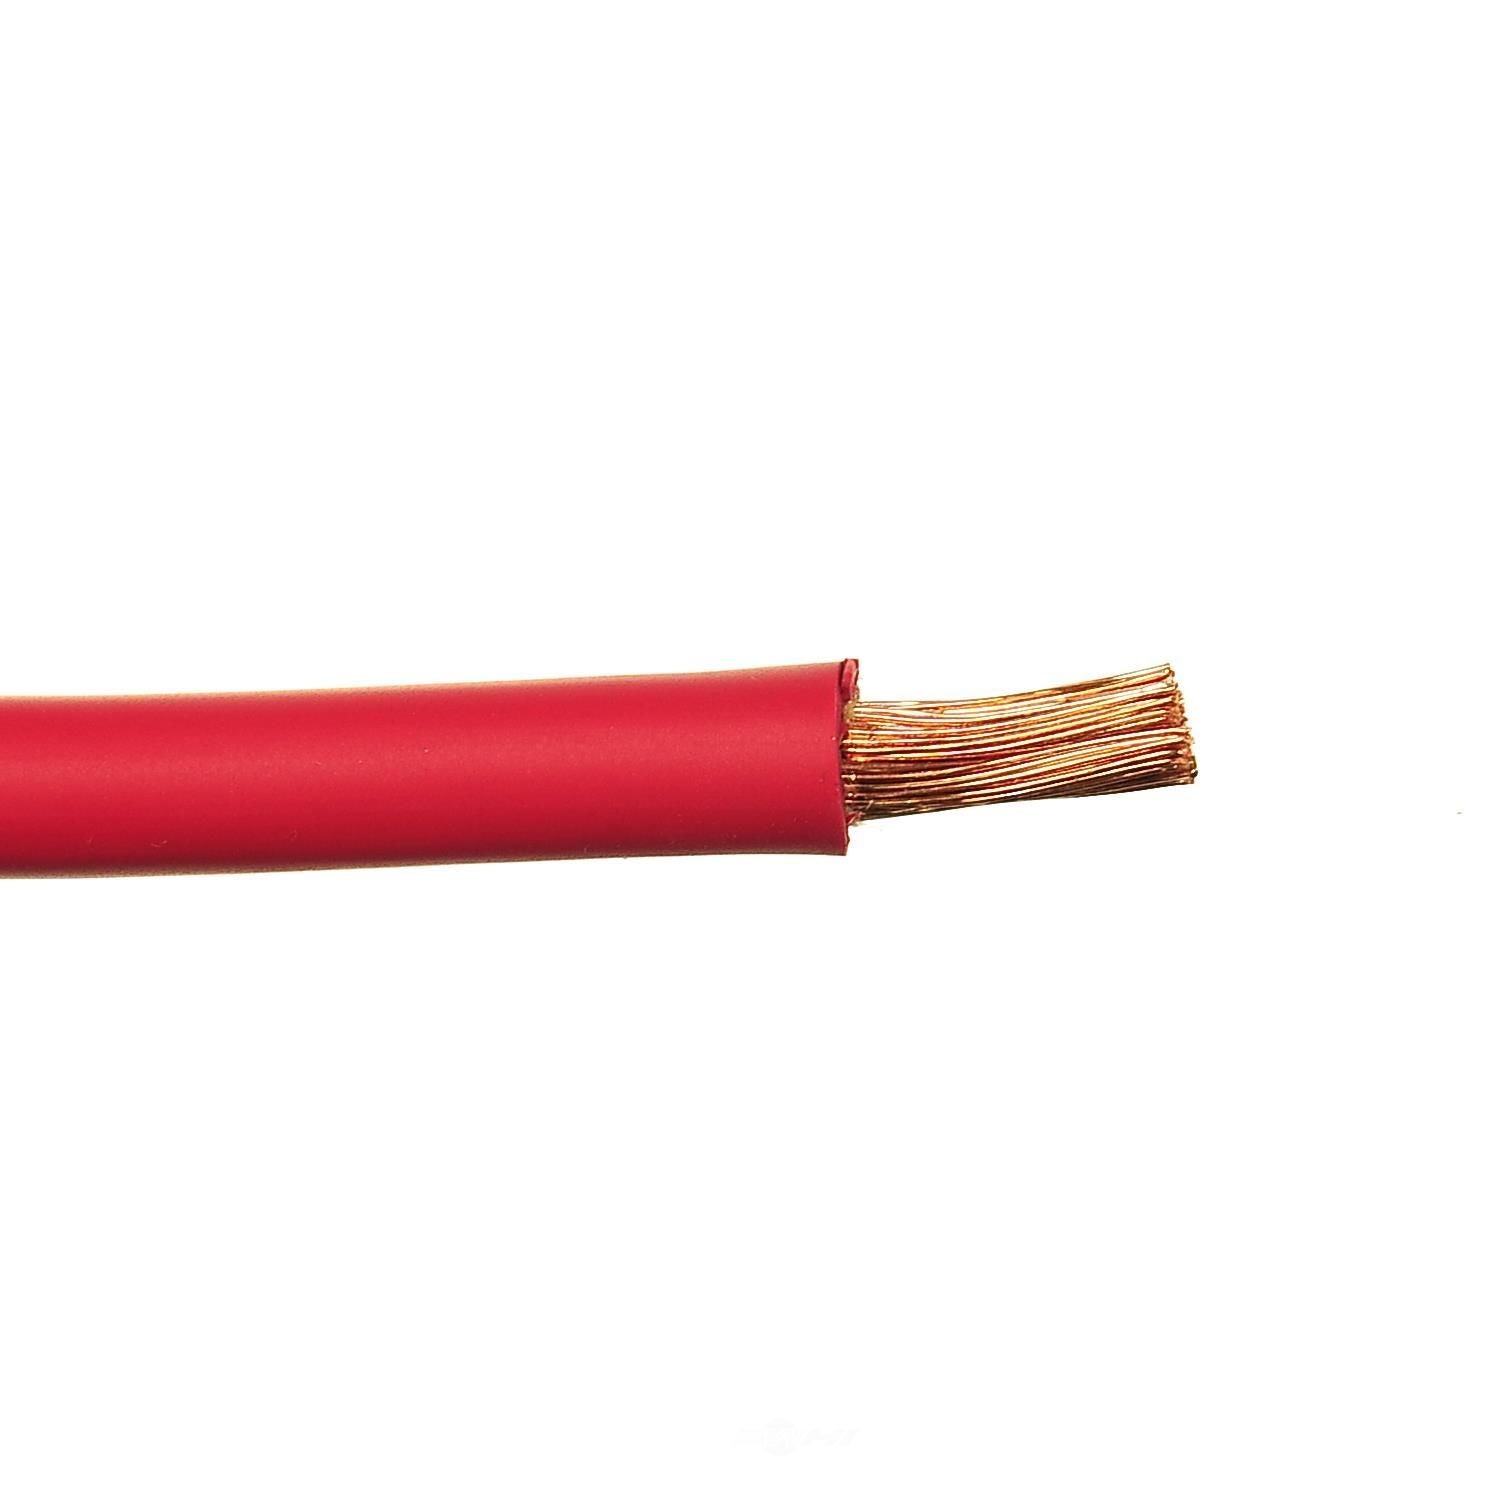 YSP CB12RD-25 Wells Bulk Cable (Red, 25', 6G)